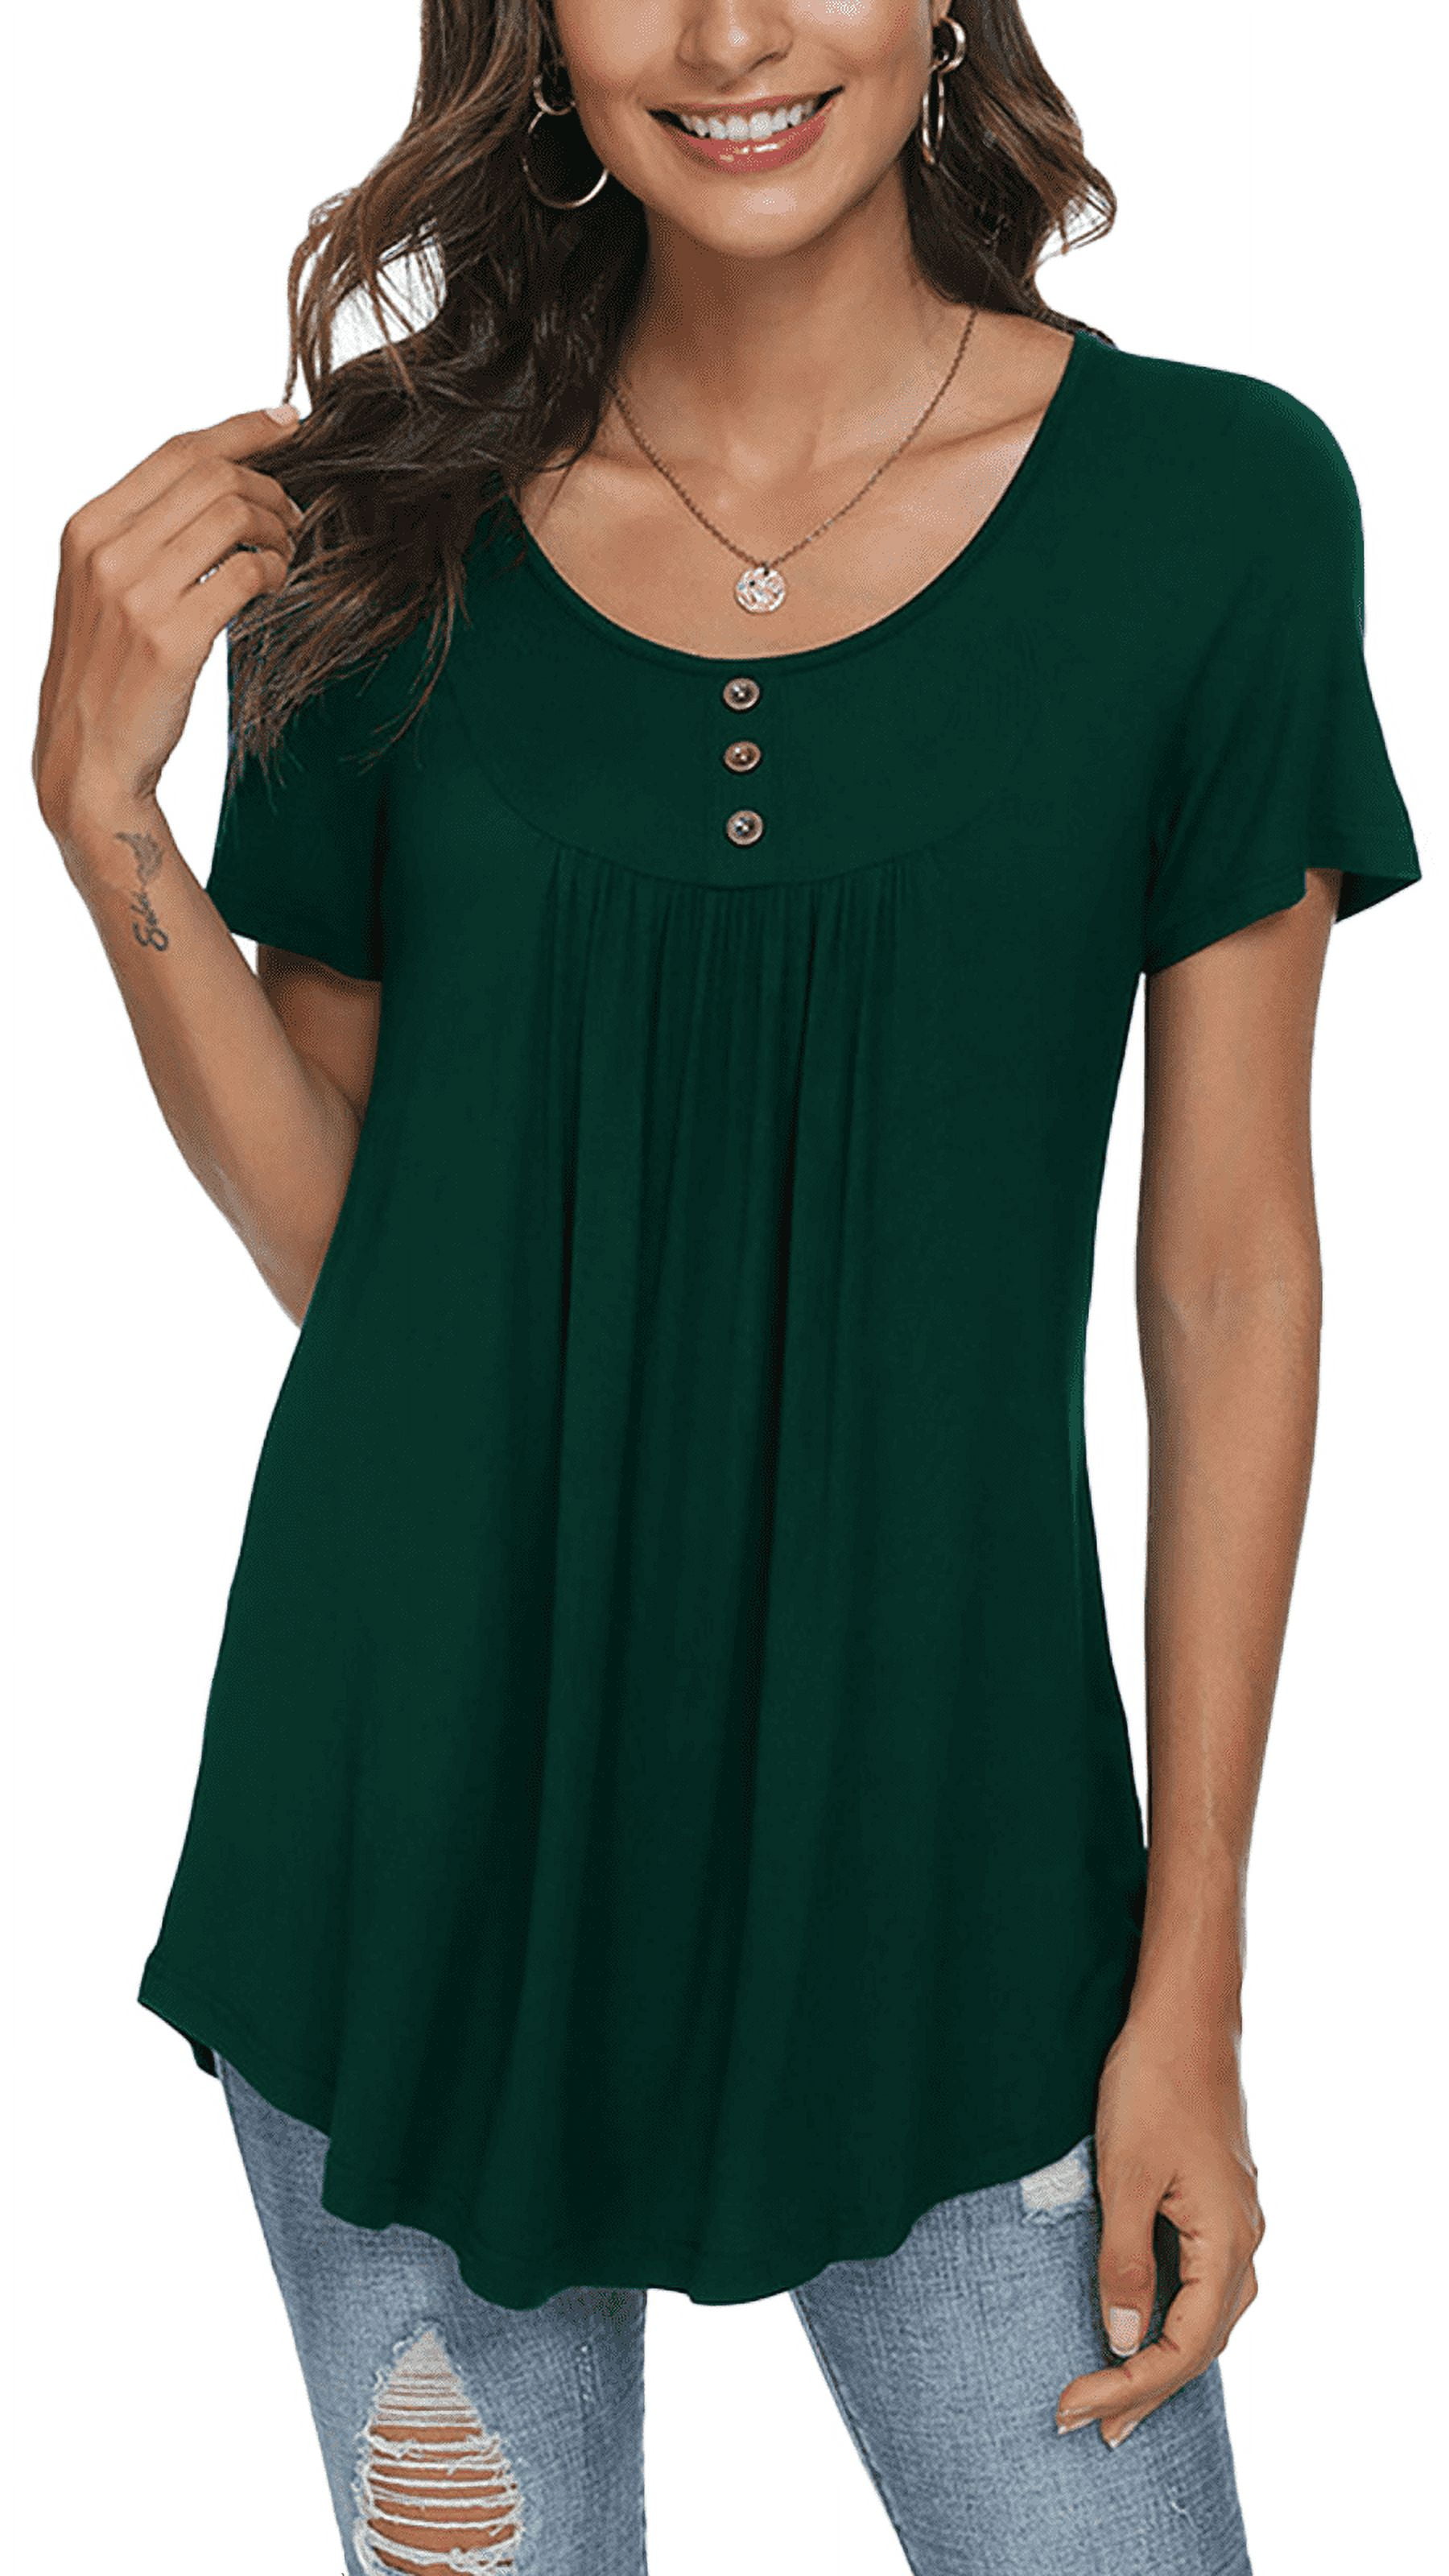 PPYOUNG Women's Summer Casual Short Sleeve Tunic Tops Fit Pleated ...